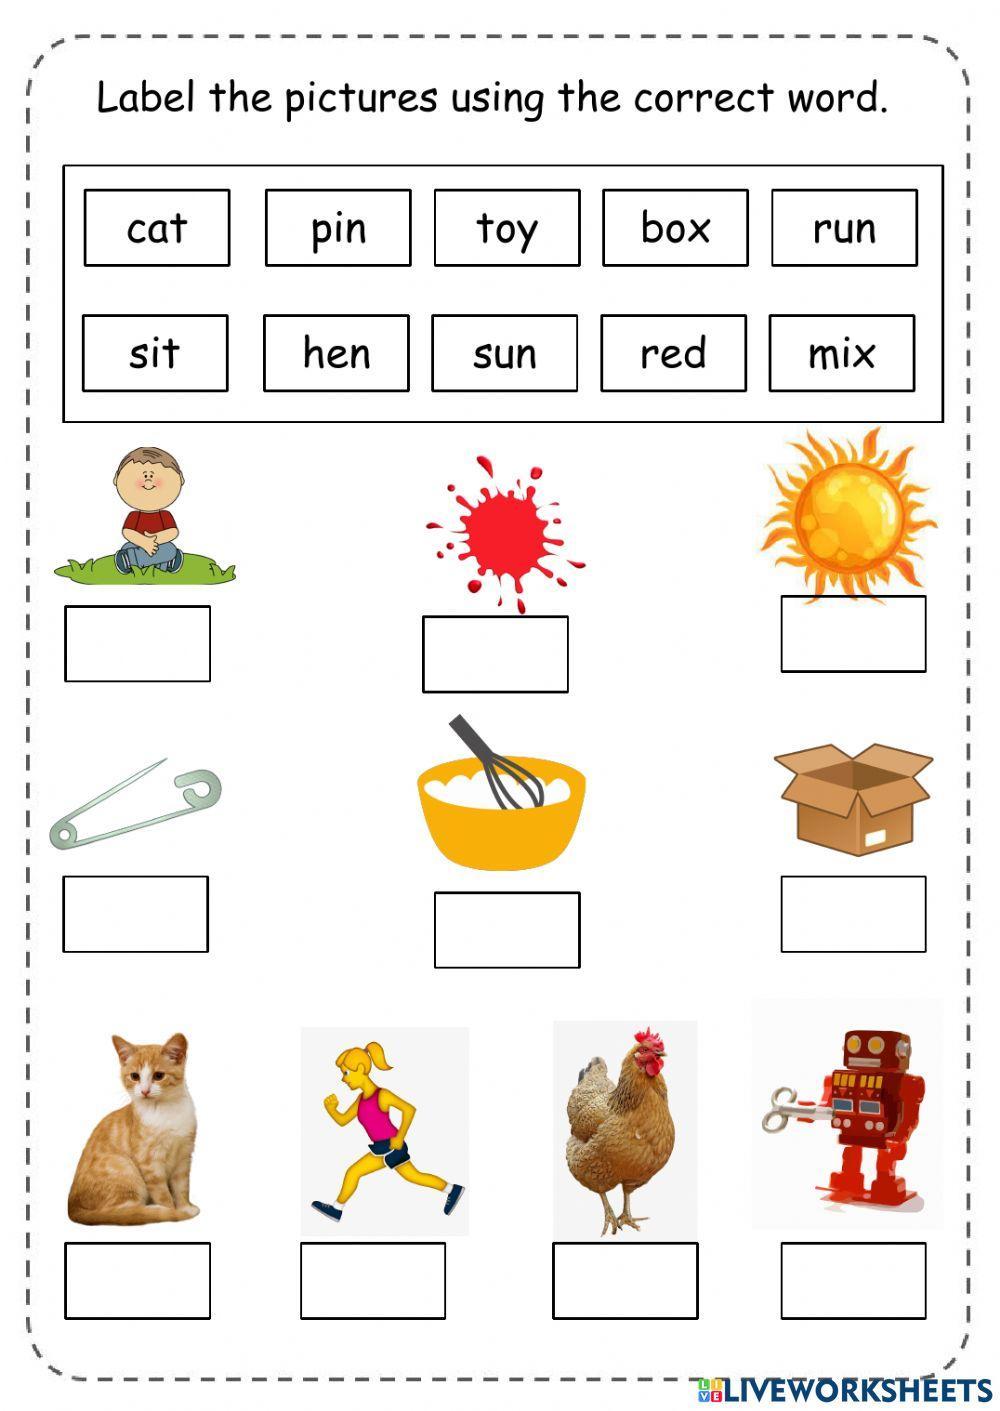 CVC words and blends